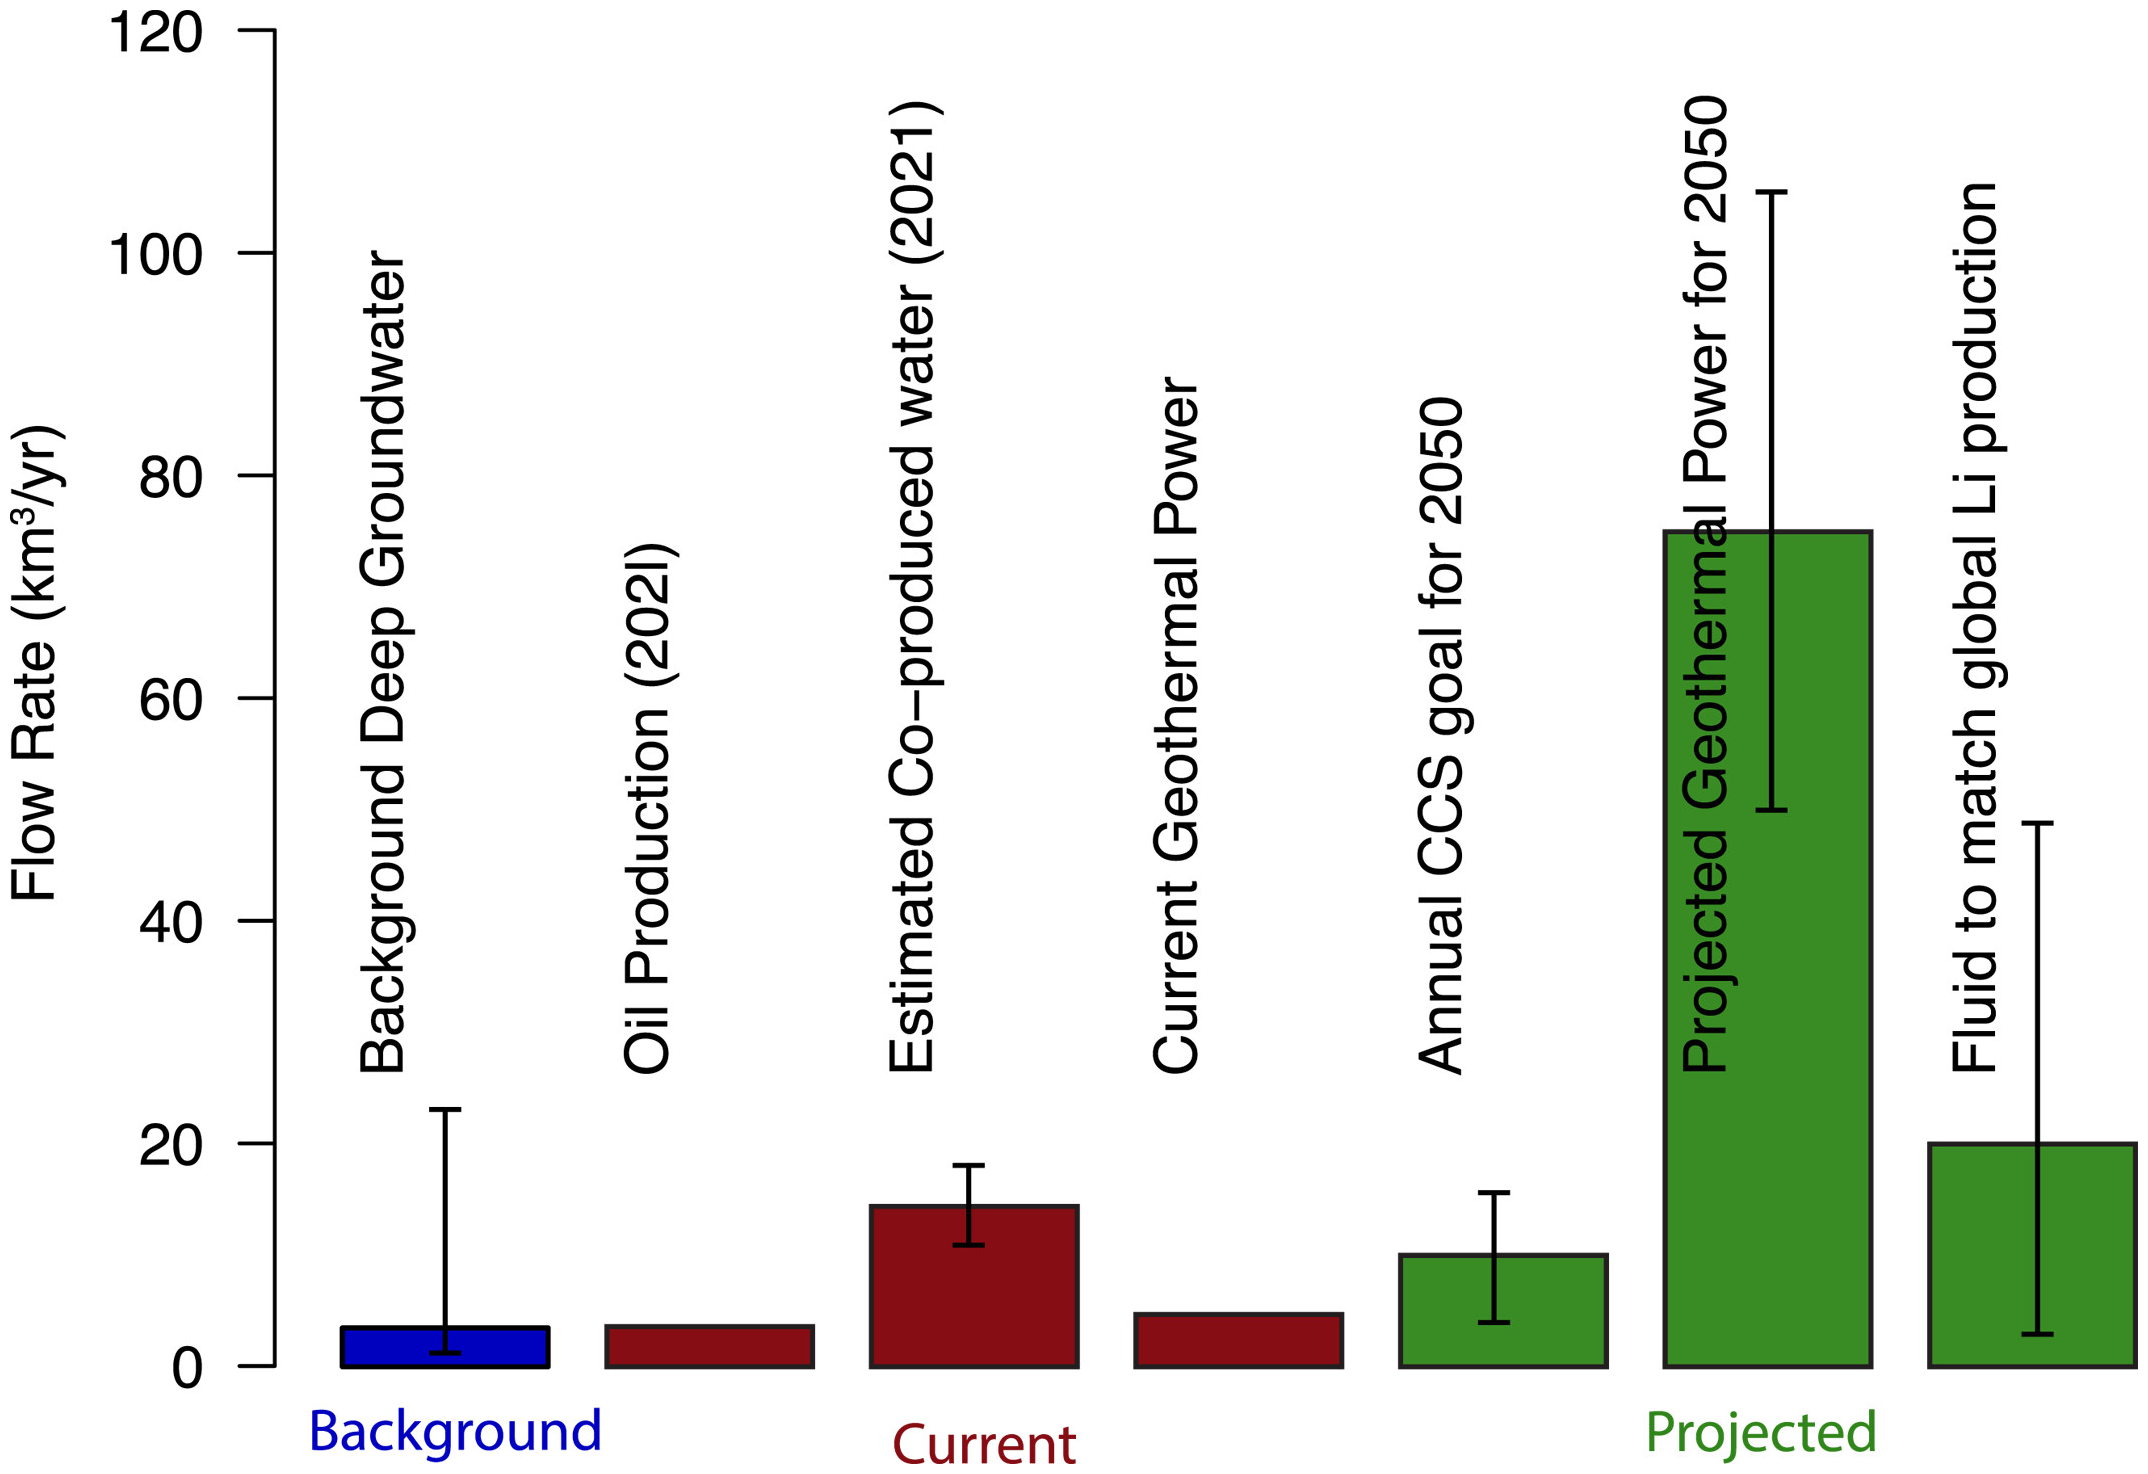 Current oil and gas production involves similar fluid fluxes to natural deep (>500 m) groundwater flow with uncertainties based on 25th and 75 percentiles from a Cl flux-based estimate (Ferguson et al., 2023). Current geothermal projects are associated with smaller fluxes (C. E. Clark et al., 2010; IEA, 2021a). The range of projected fluxes for future CCS (Krevor et al., 2023; Zoback & Smit, 2023) and geothermal electricity production (van der Zwaan & Dalla Longa, 2019) are similar to current fluxes from oil and gas production (IEA, 2021b). Scaling up Li extraction (Marza et al., 2023) from sedimentary basins to current global production from all sources considering 25th, 50th, and 75th percentile of Li concentrations in produced waters would also require a similar amount of fluid. Graphic: Ferguson, et al., 2024 / Earth’s Future